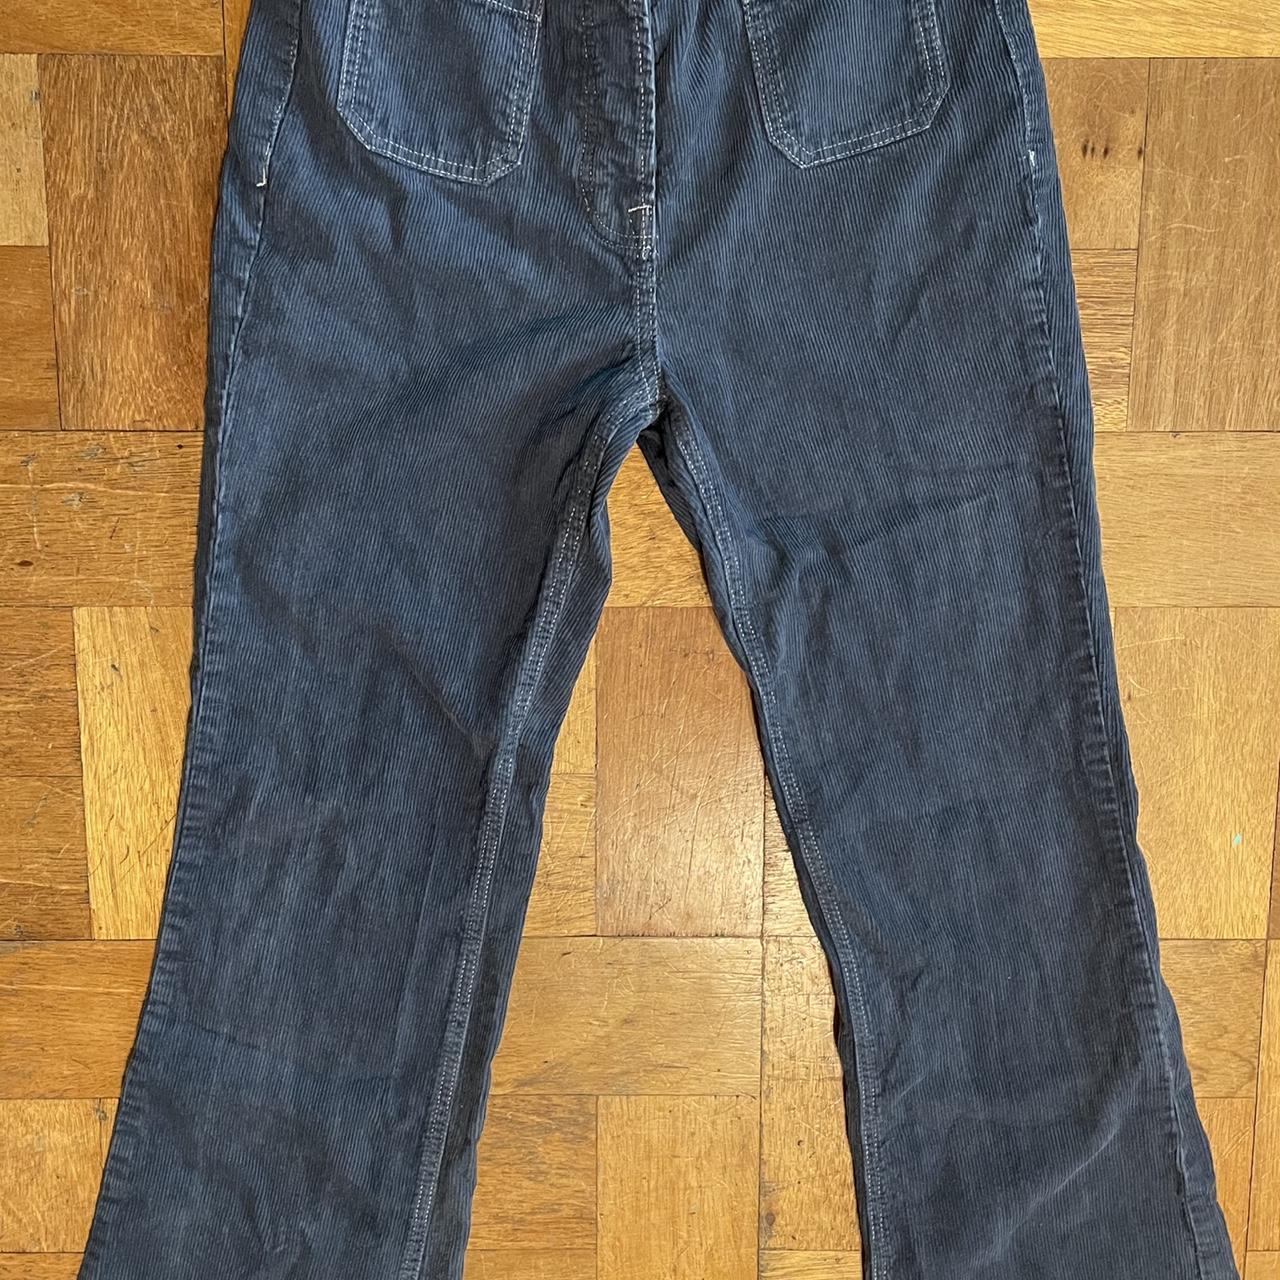 PacSun Blue Corduroy High Waisted Bootcut Jeans